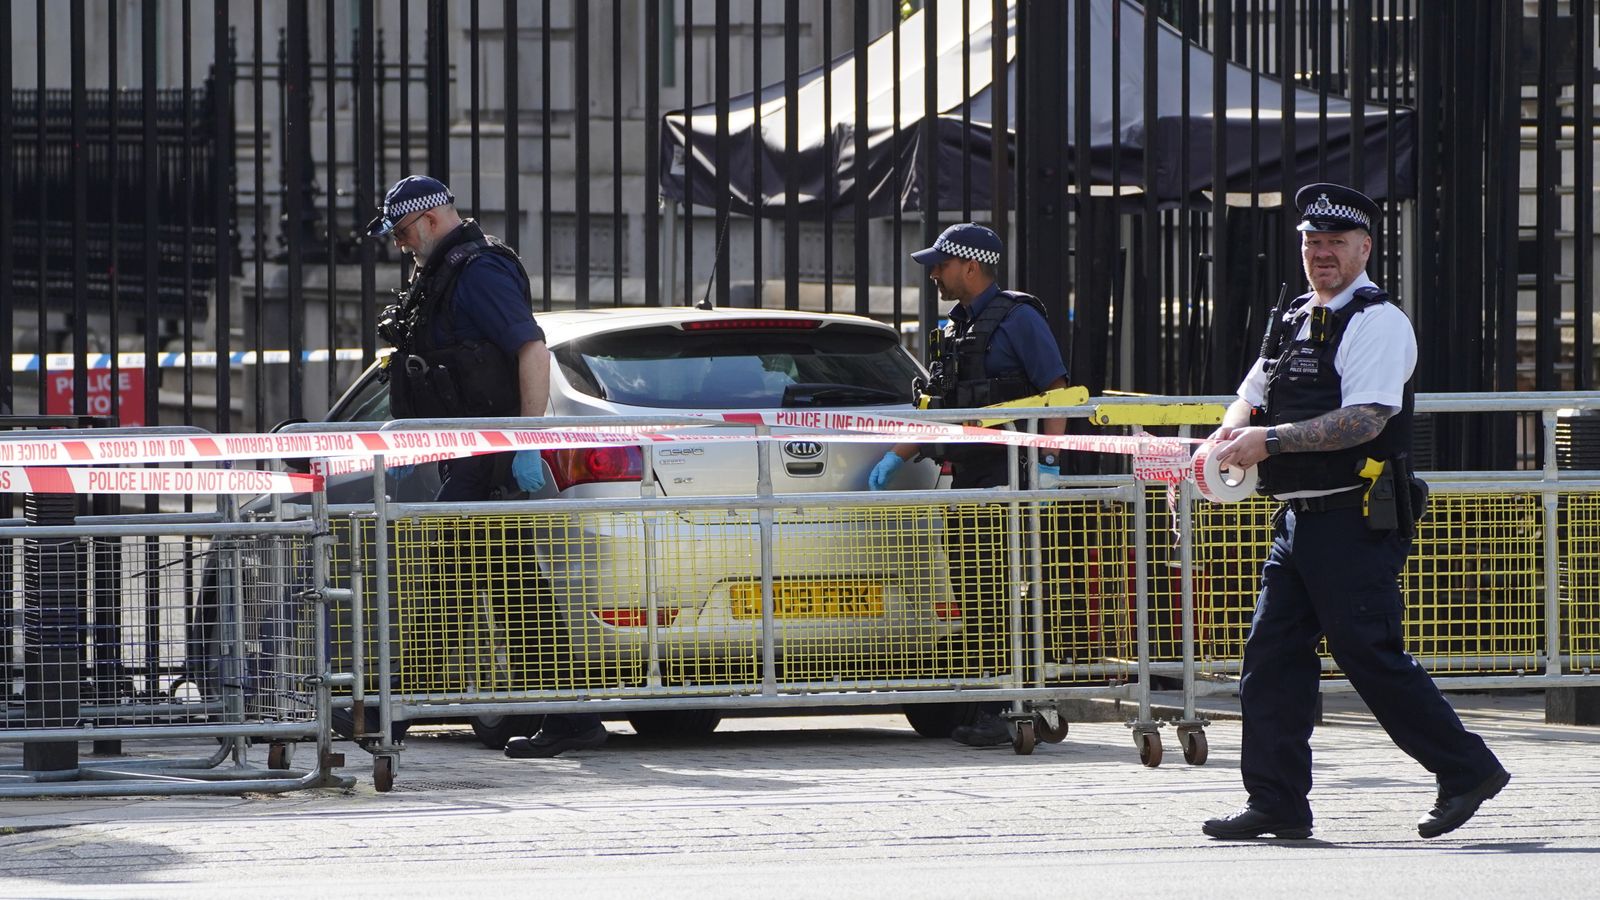 Police with Tasers and 'rifles' confront man after car hits Downing Street gates with 'almighty smash', say witnesses